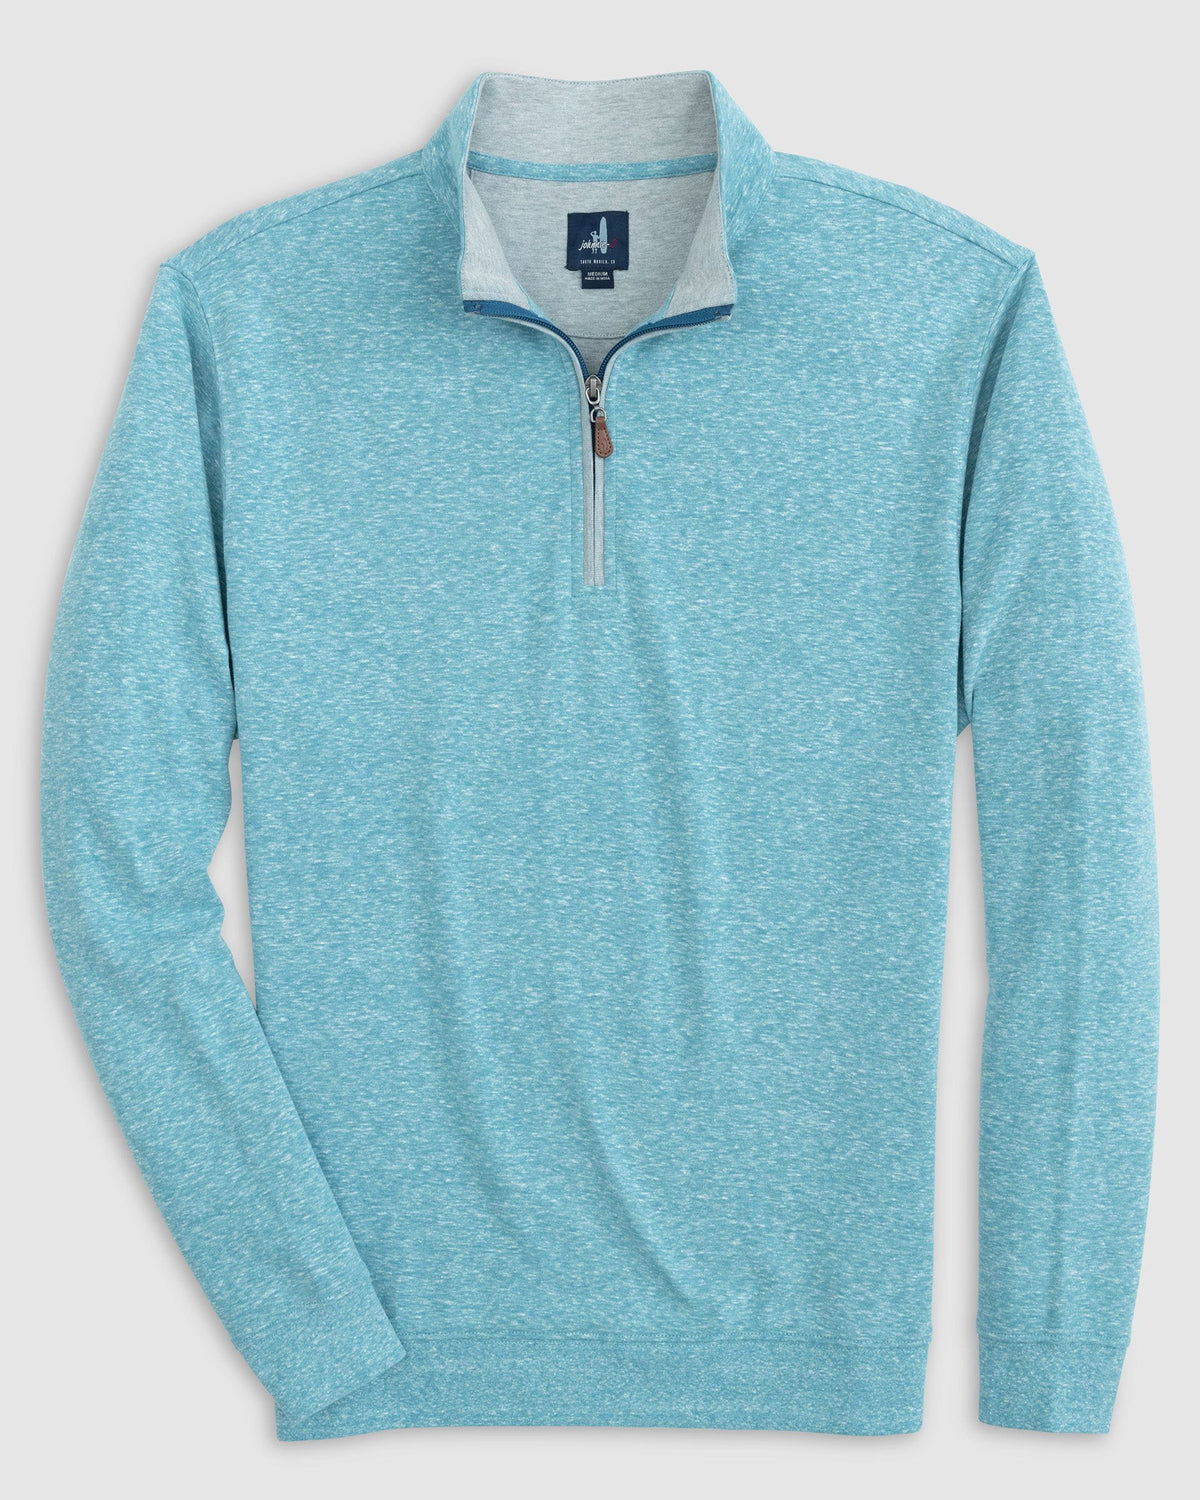 Johnnie-O Sully 1/4 Zip Pullover Playa